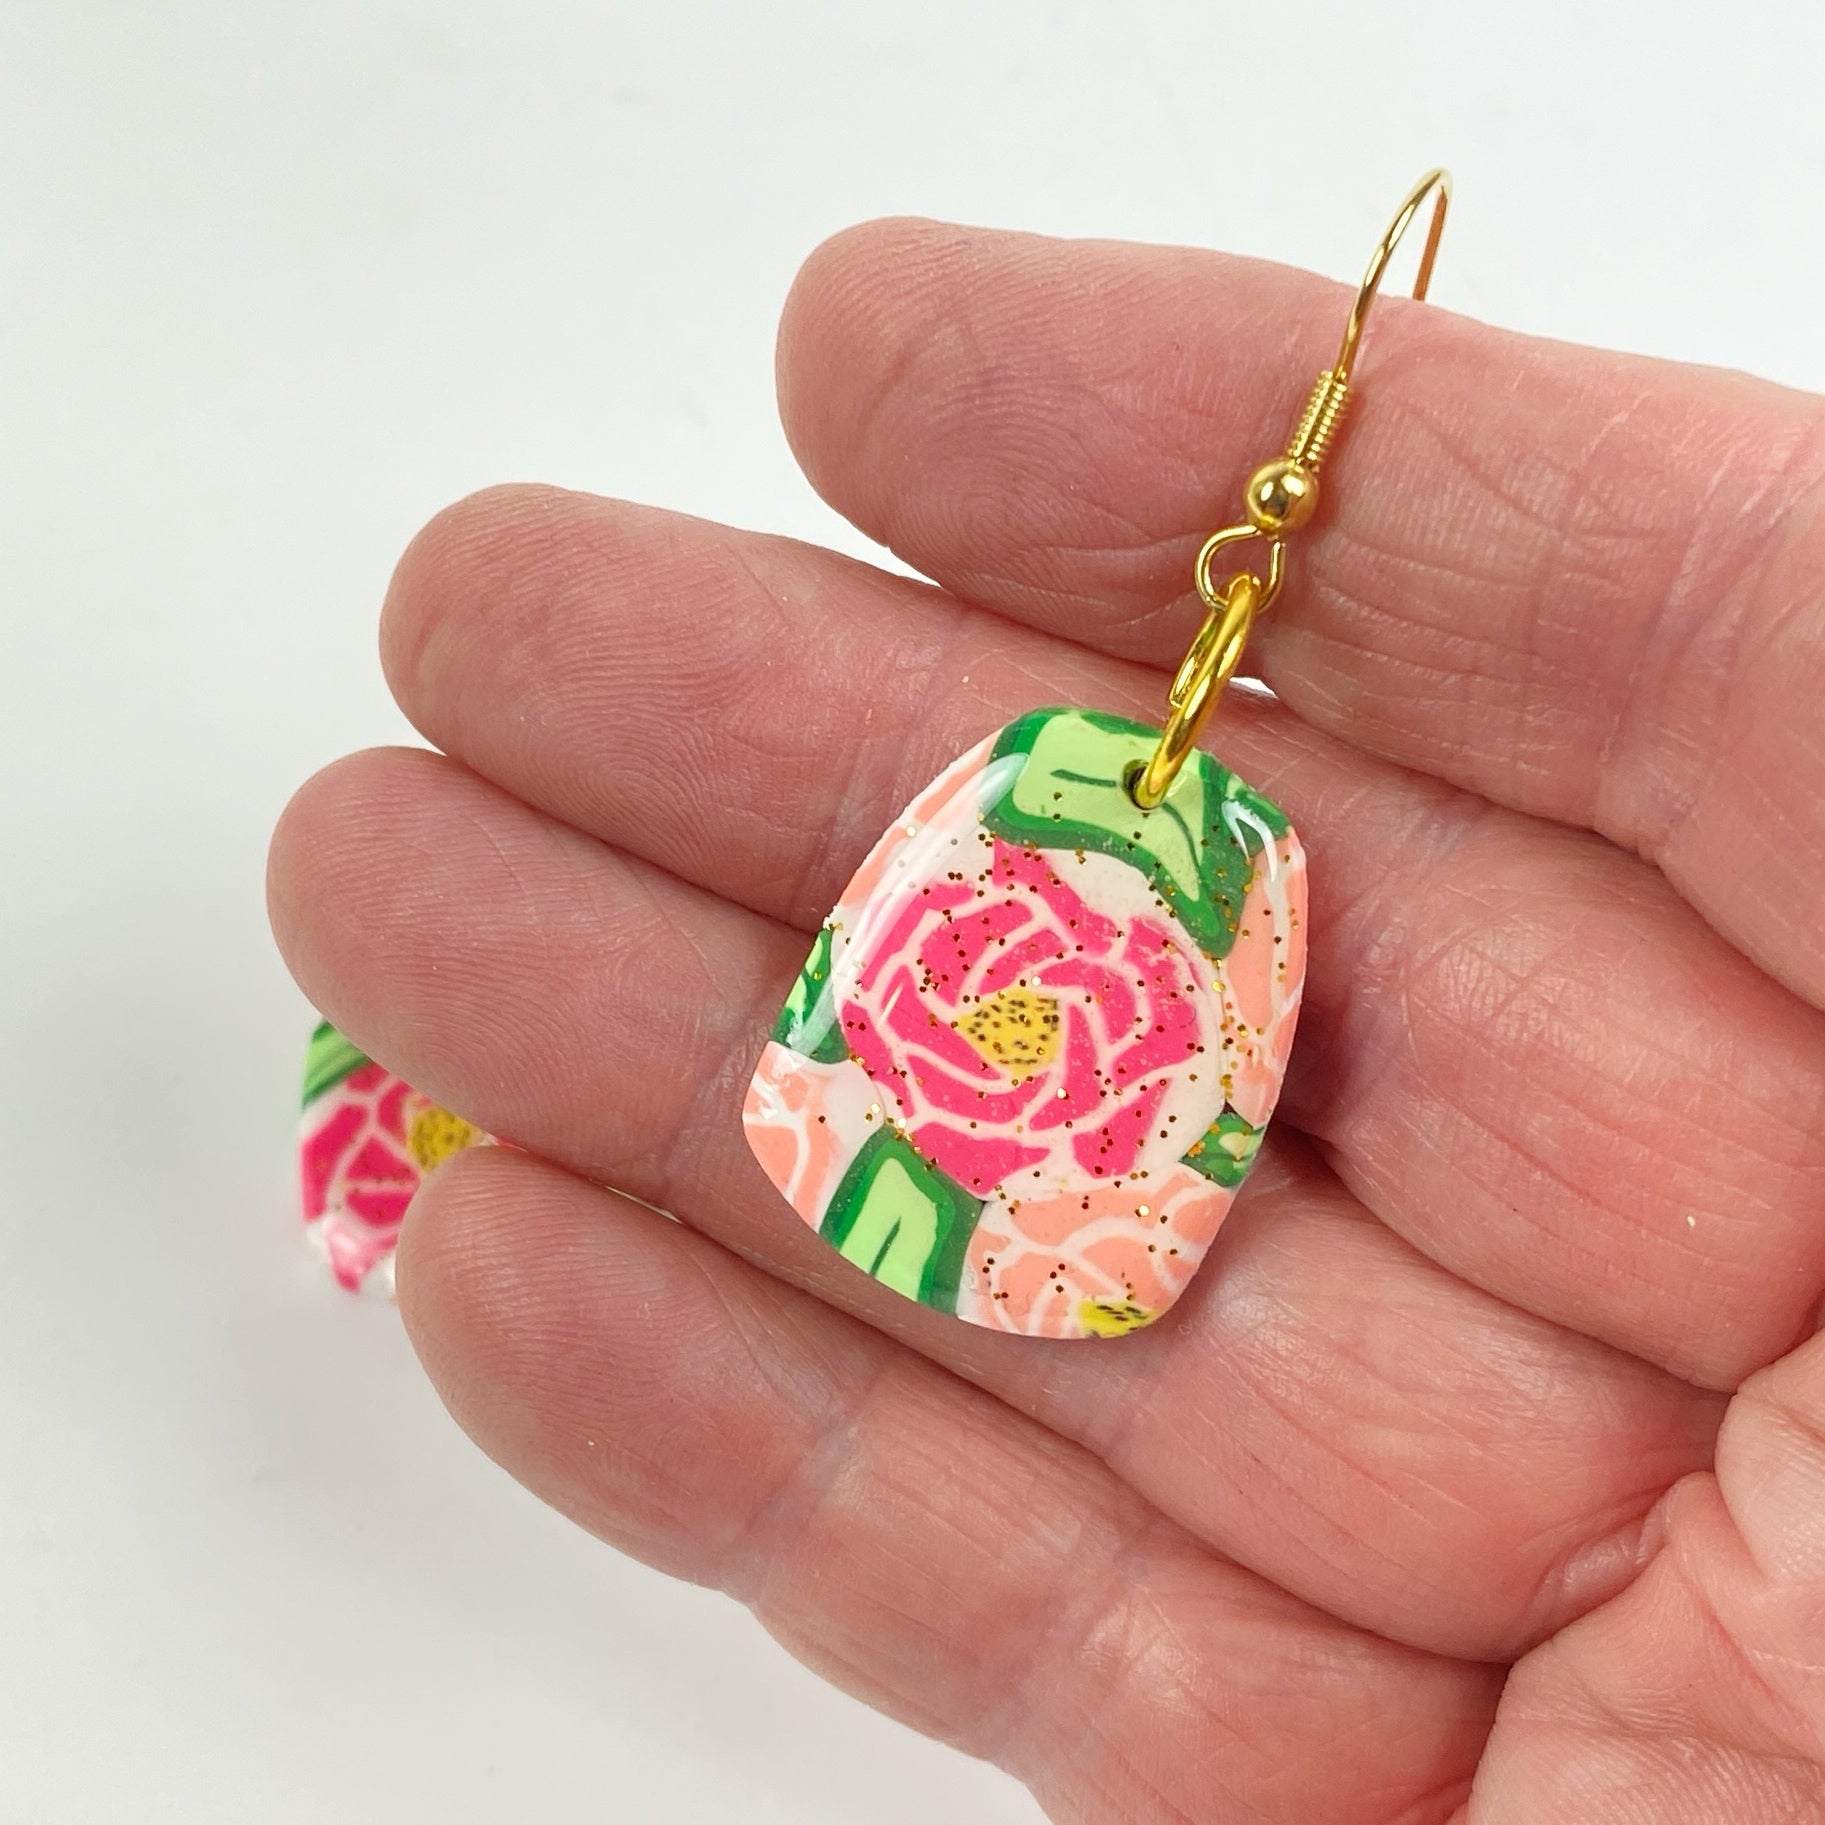 The Roses Handmade Polymer Clay Dangle Earrings handheld for size reference